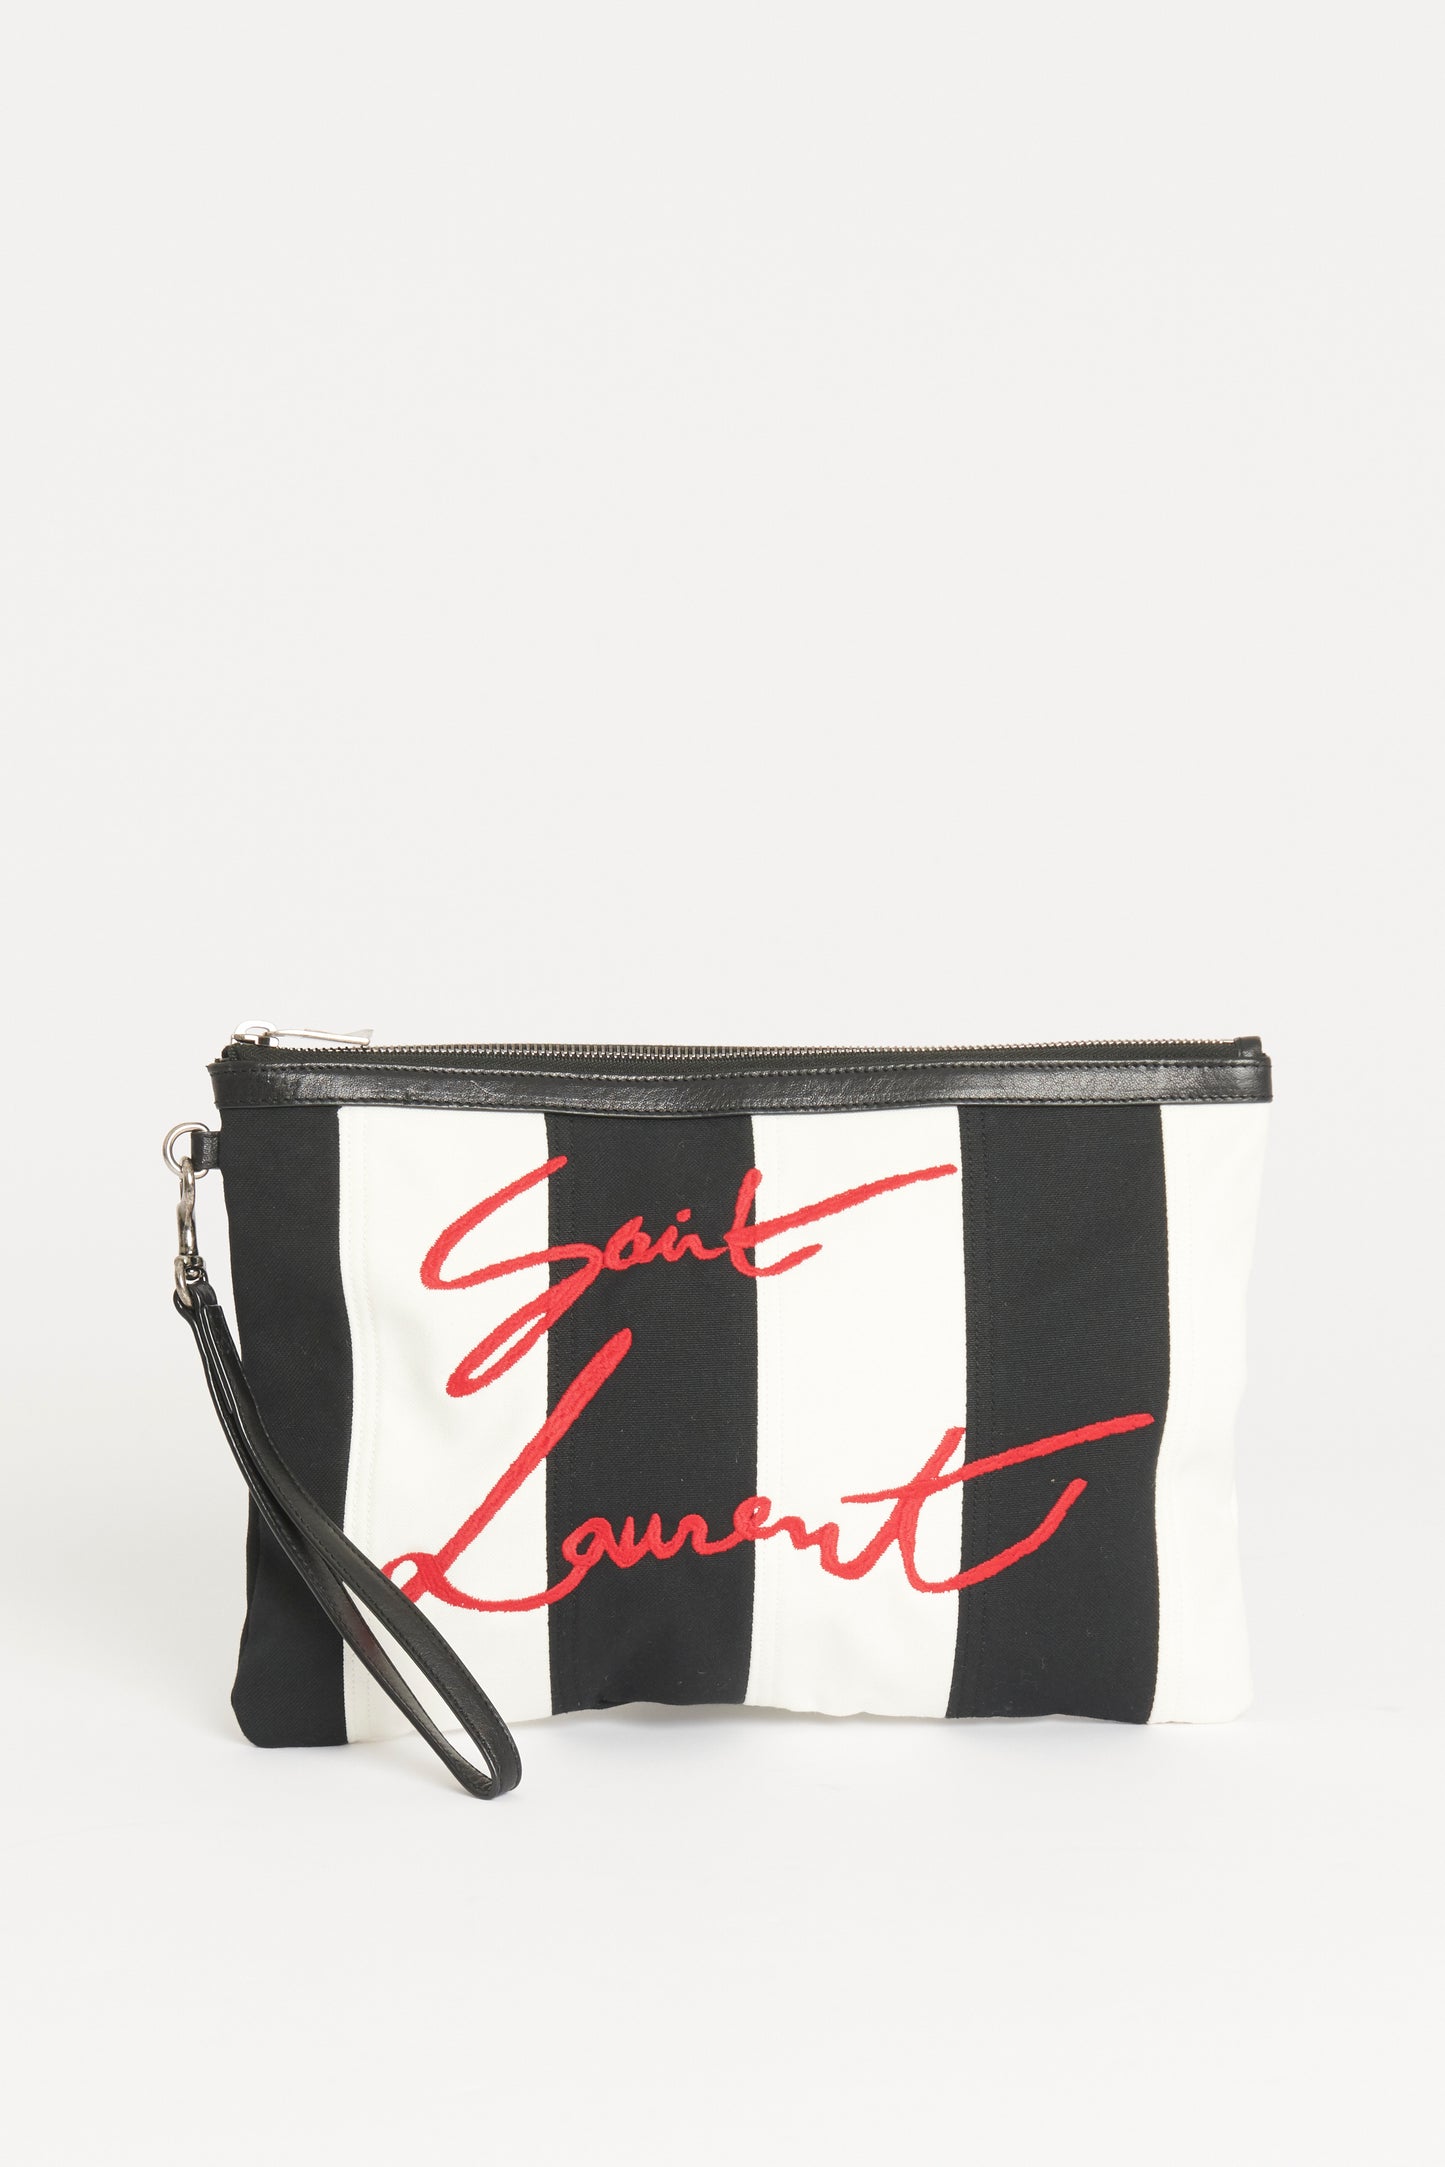 Black and White Cotton Preowned Clutch Bag